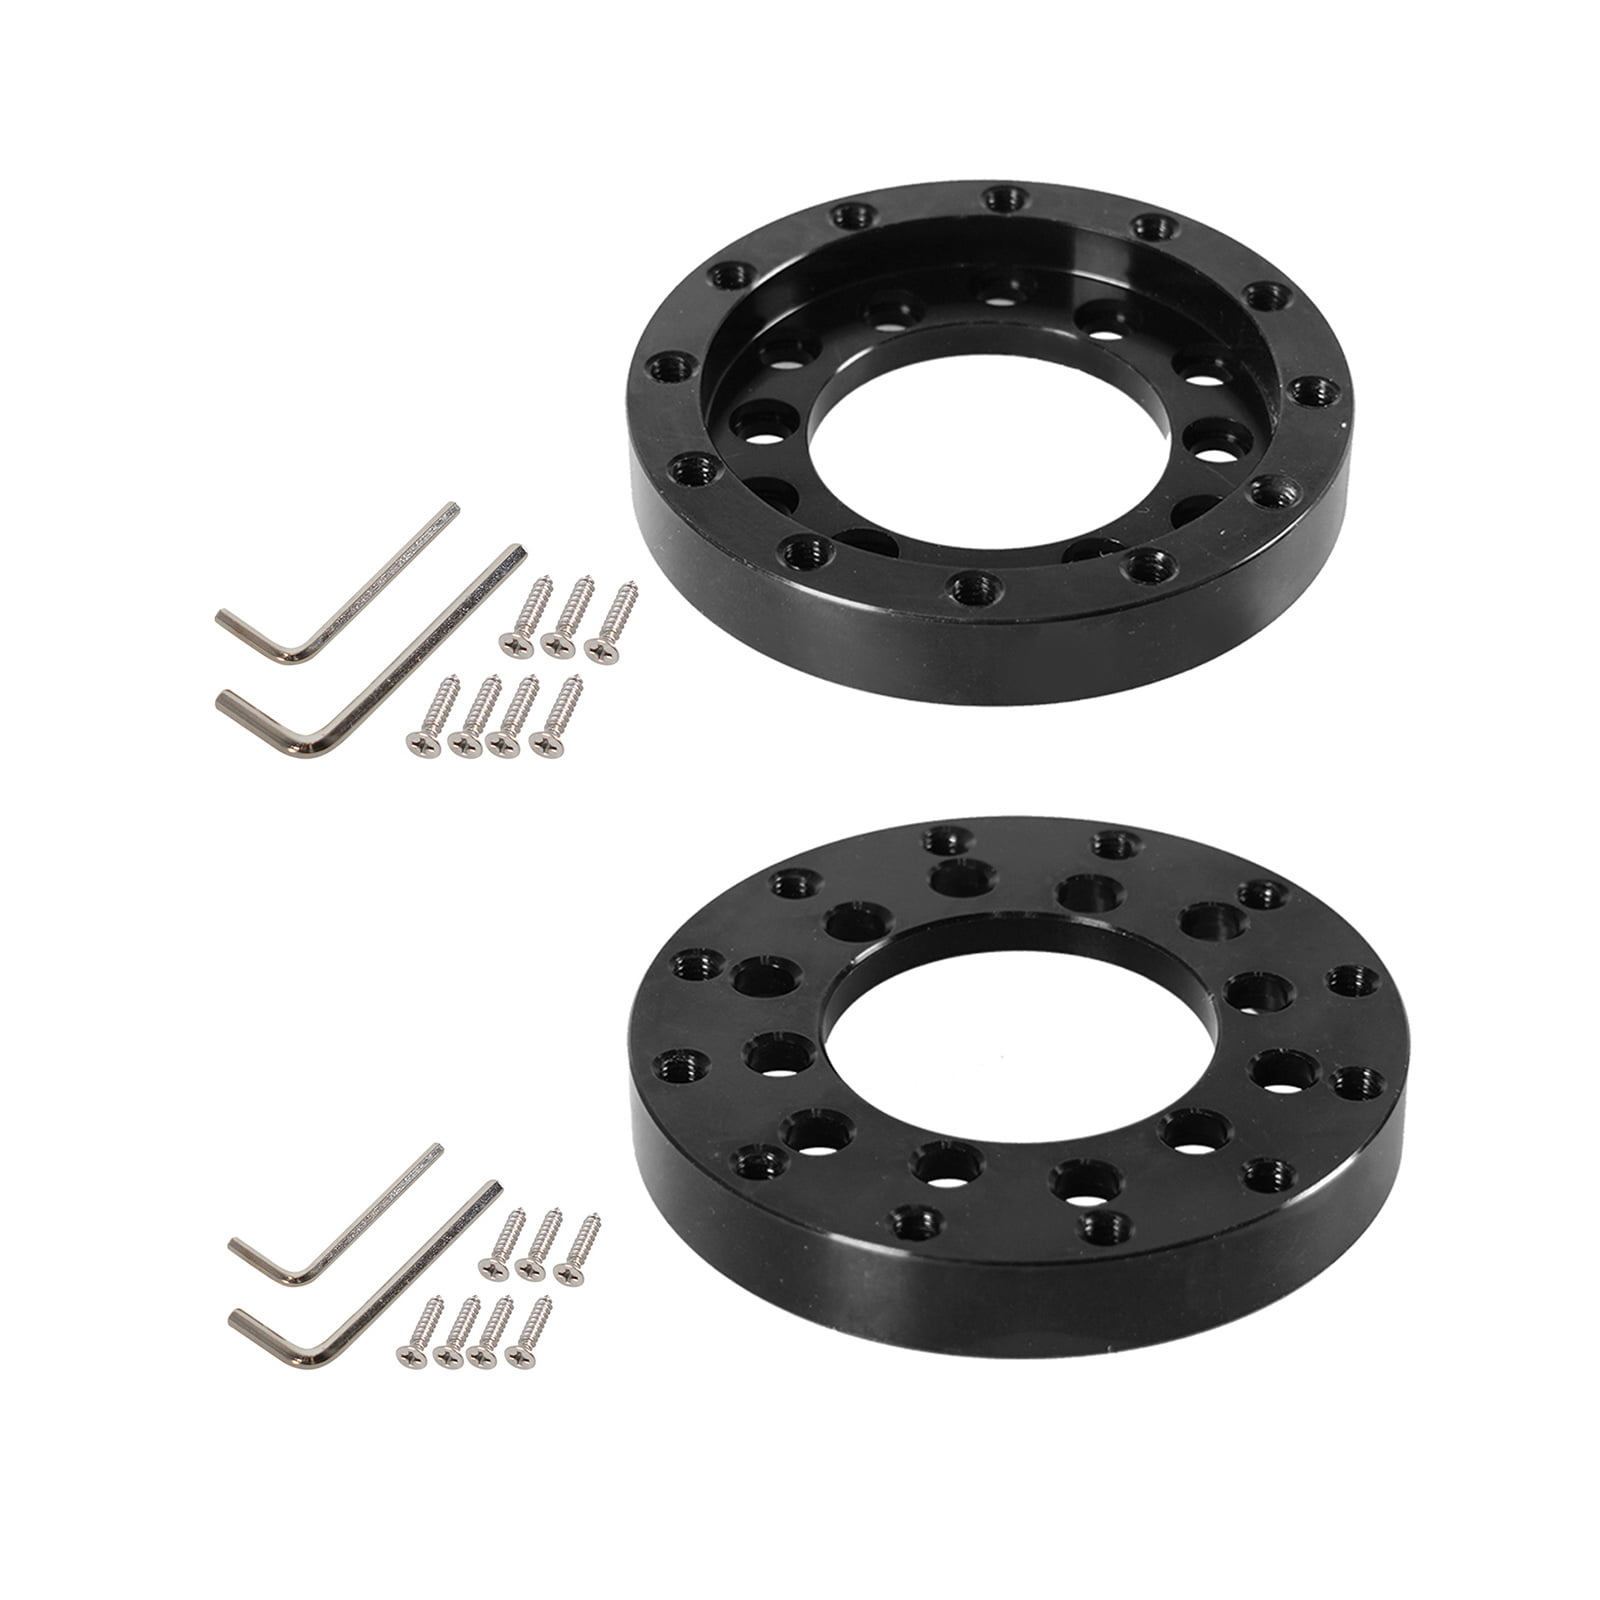 70MM/73MM Steering Wheel Adapter Plate For Logitech G25 G27 Sparco